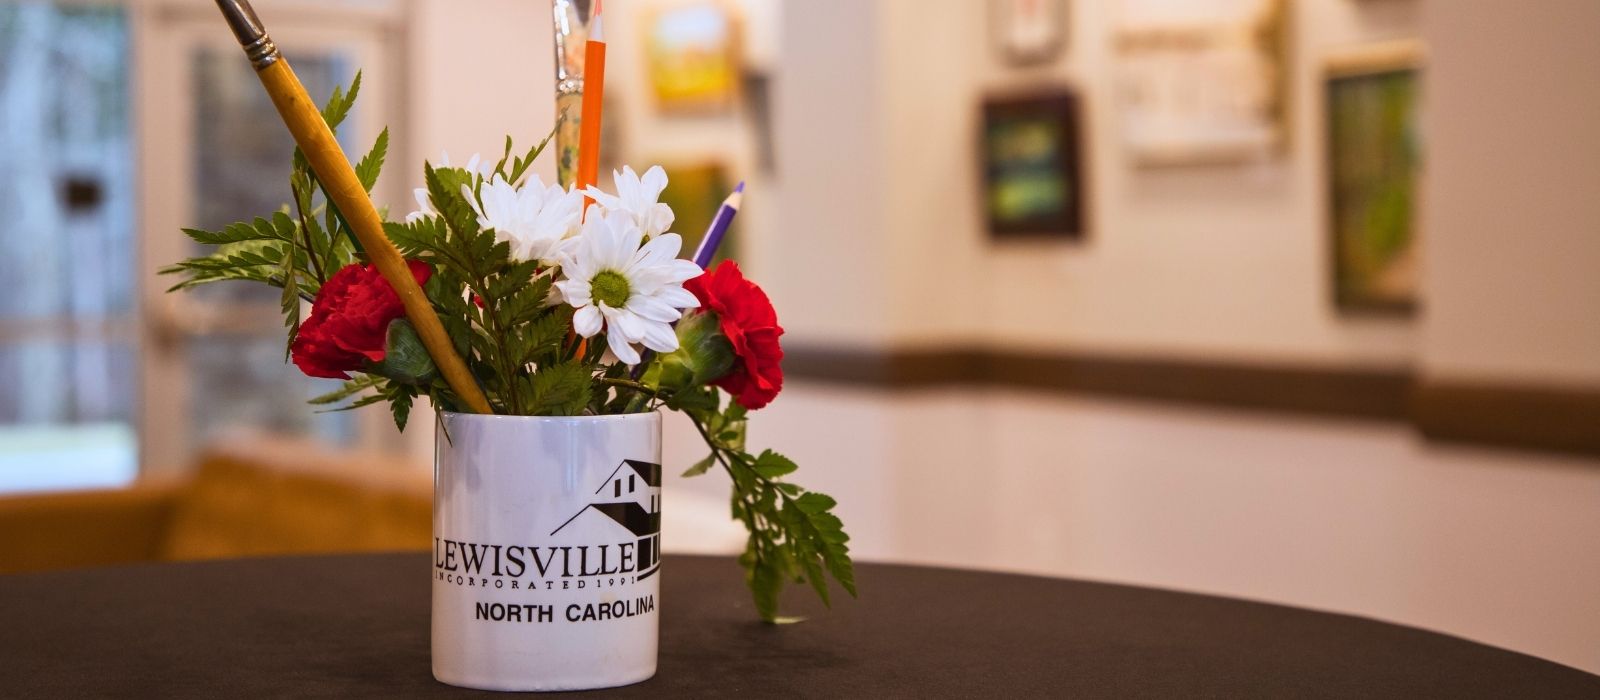 Art show display with a Lewisville mug and flowers